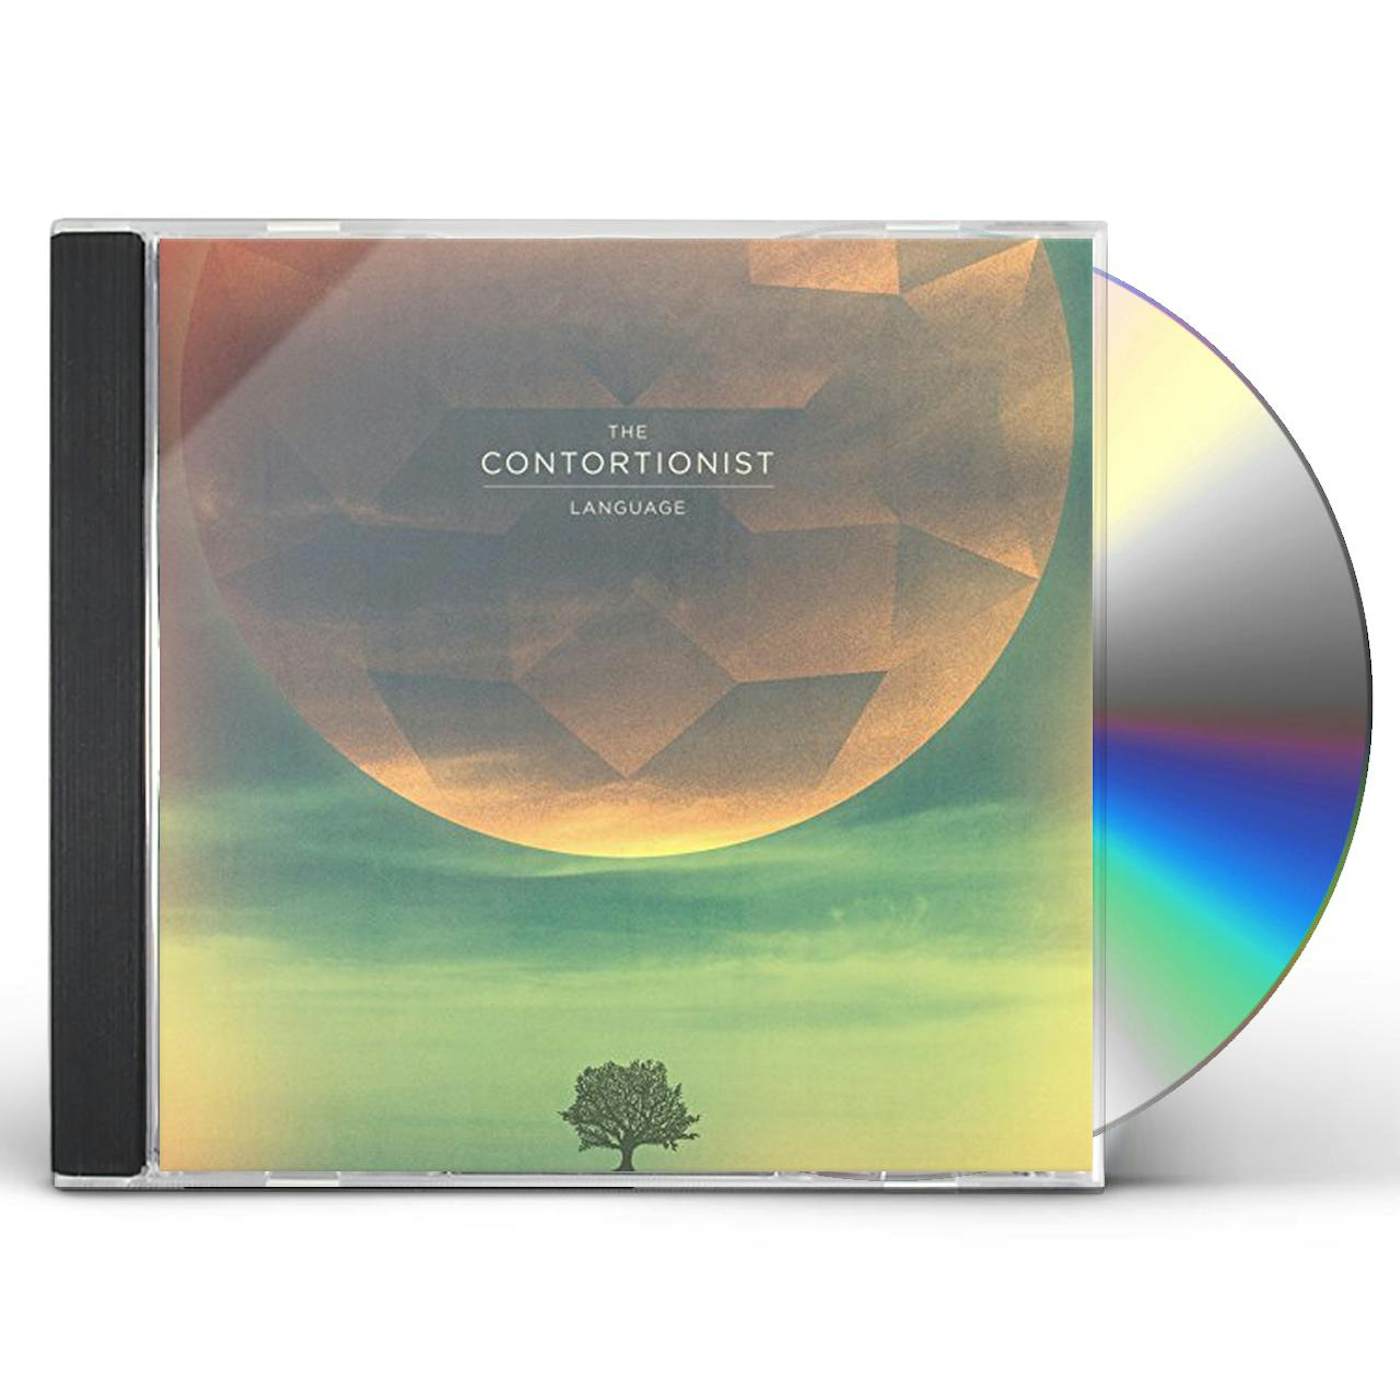 The Contortionist LANGUAGE CD